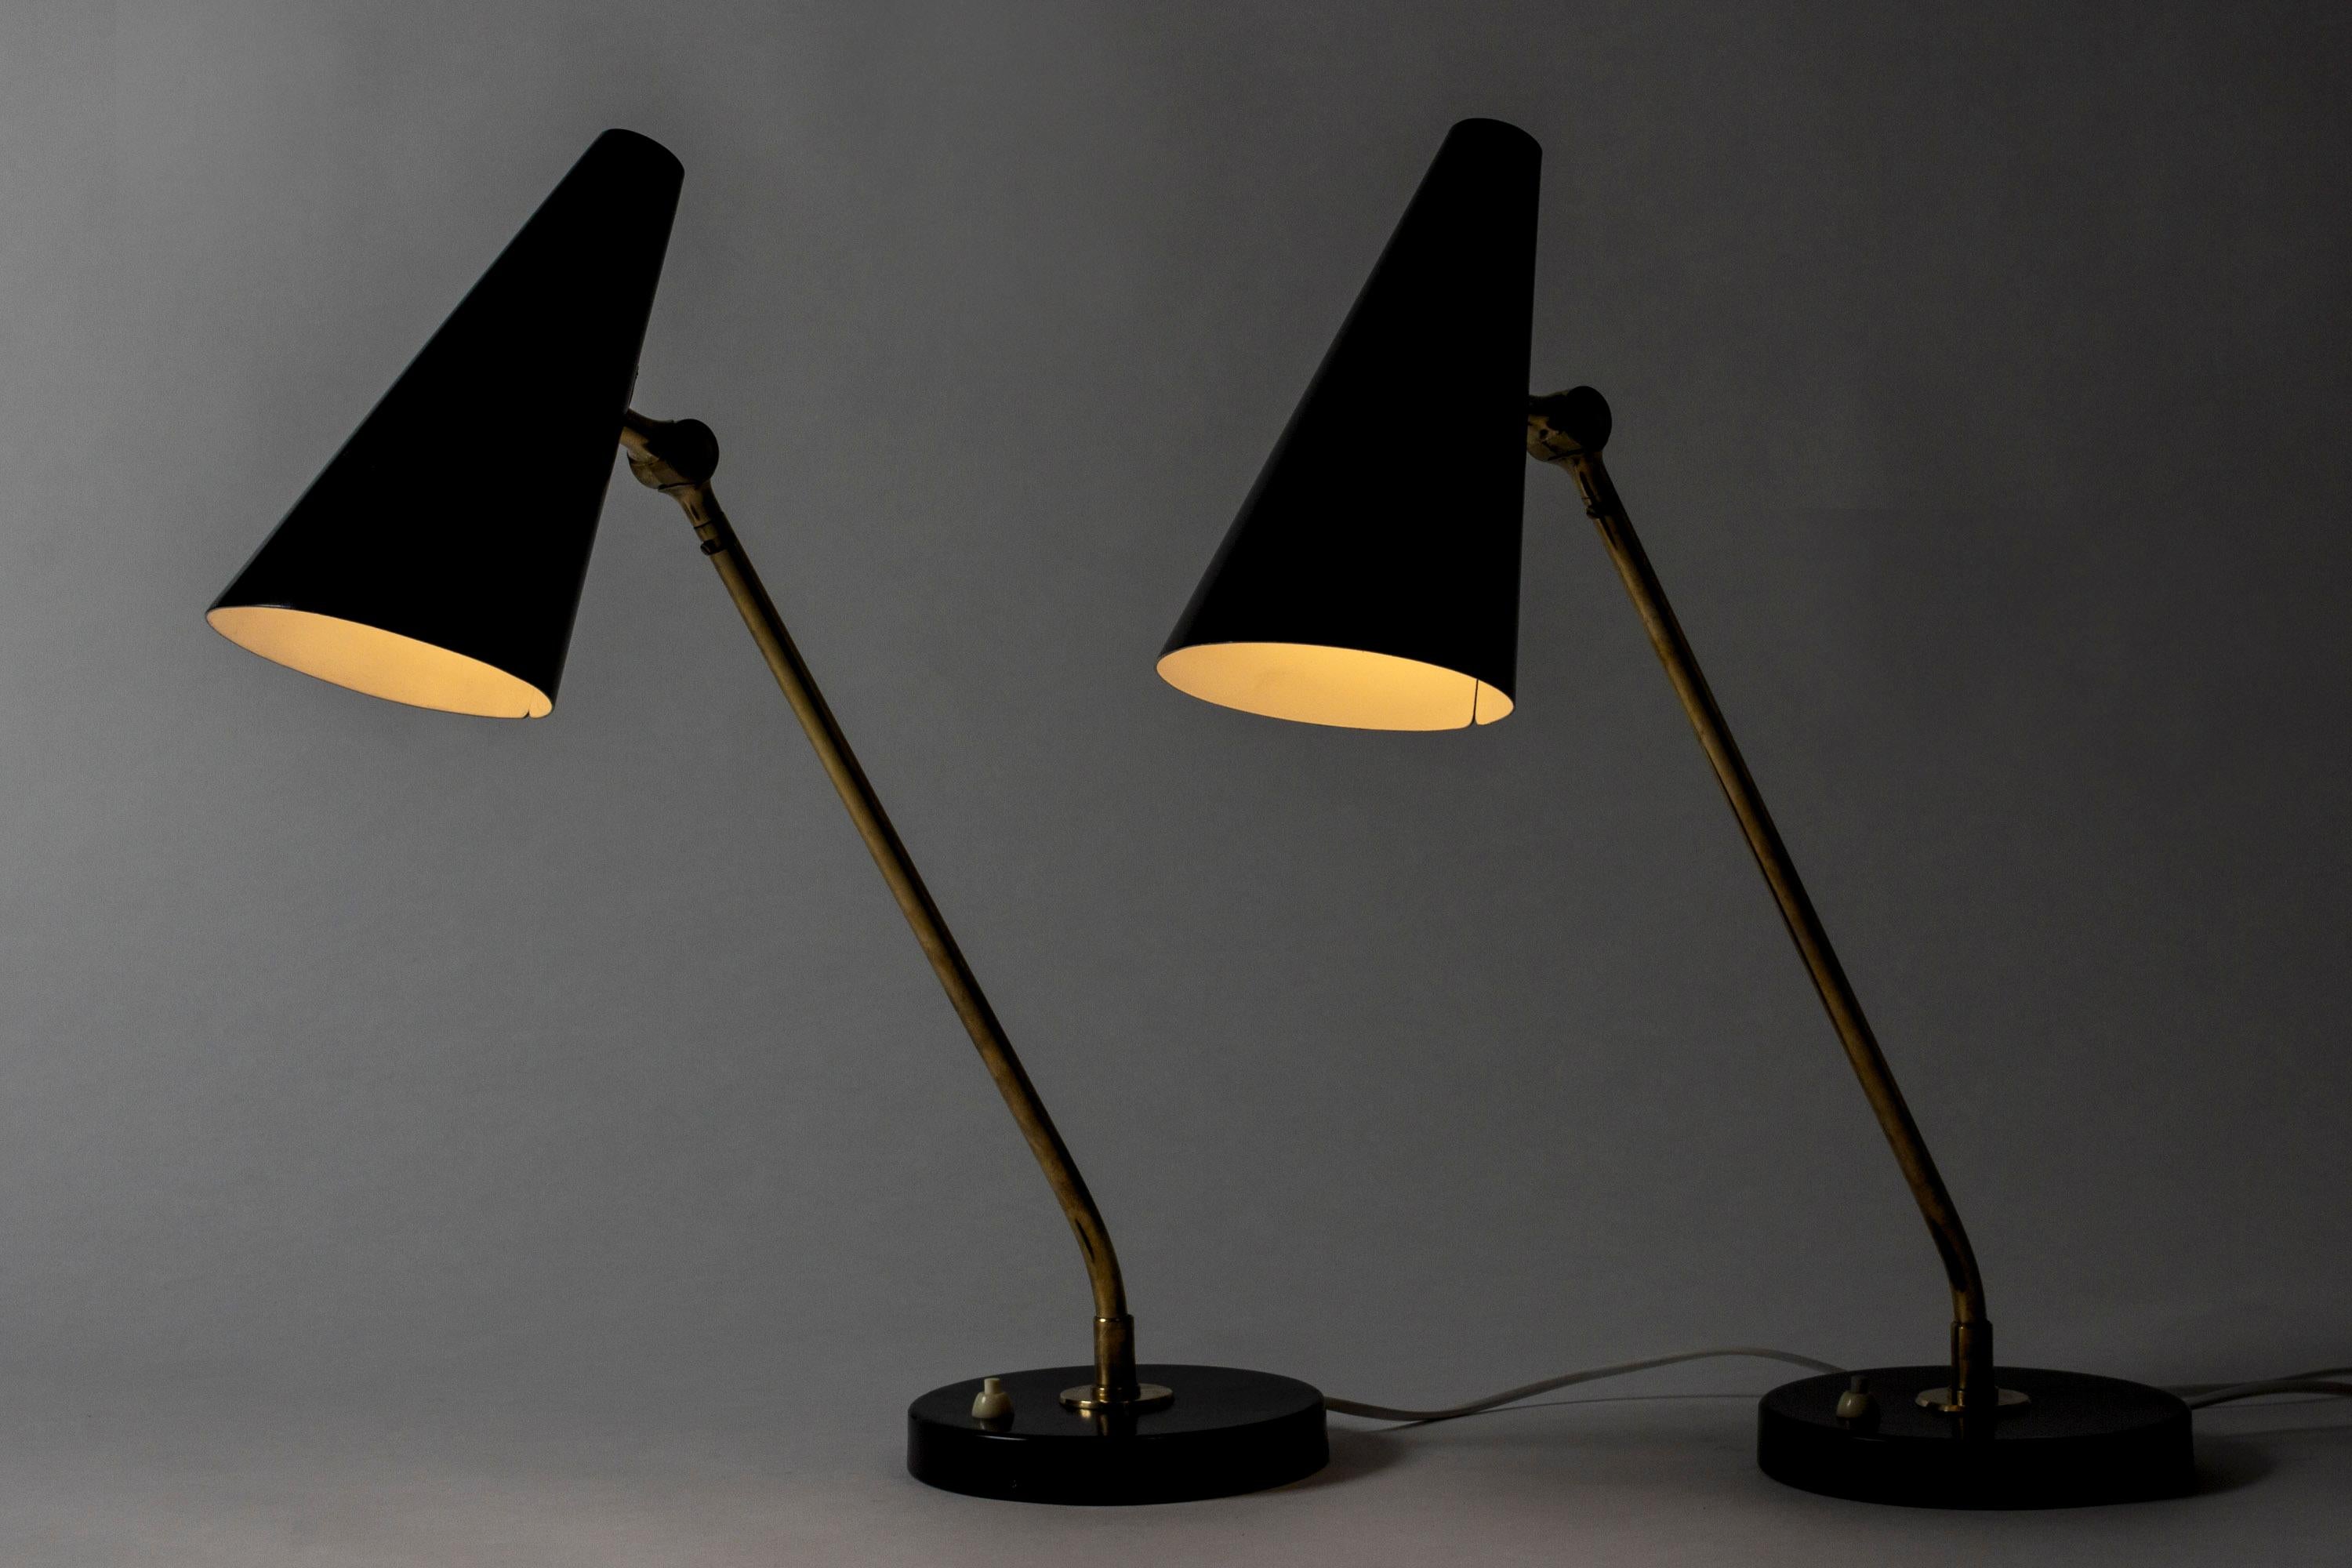 Pair of amazing table or desk lamps by Bertil Brisborg, large in size, with elongated, strikingly angled stems. Made from brass with black lacquered shades and bases.